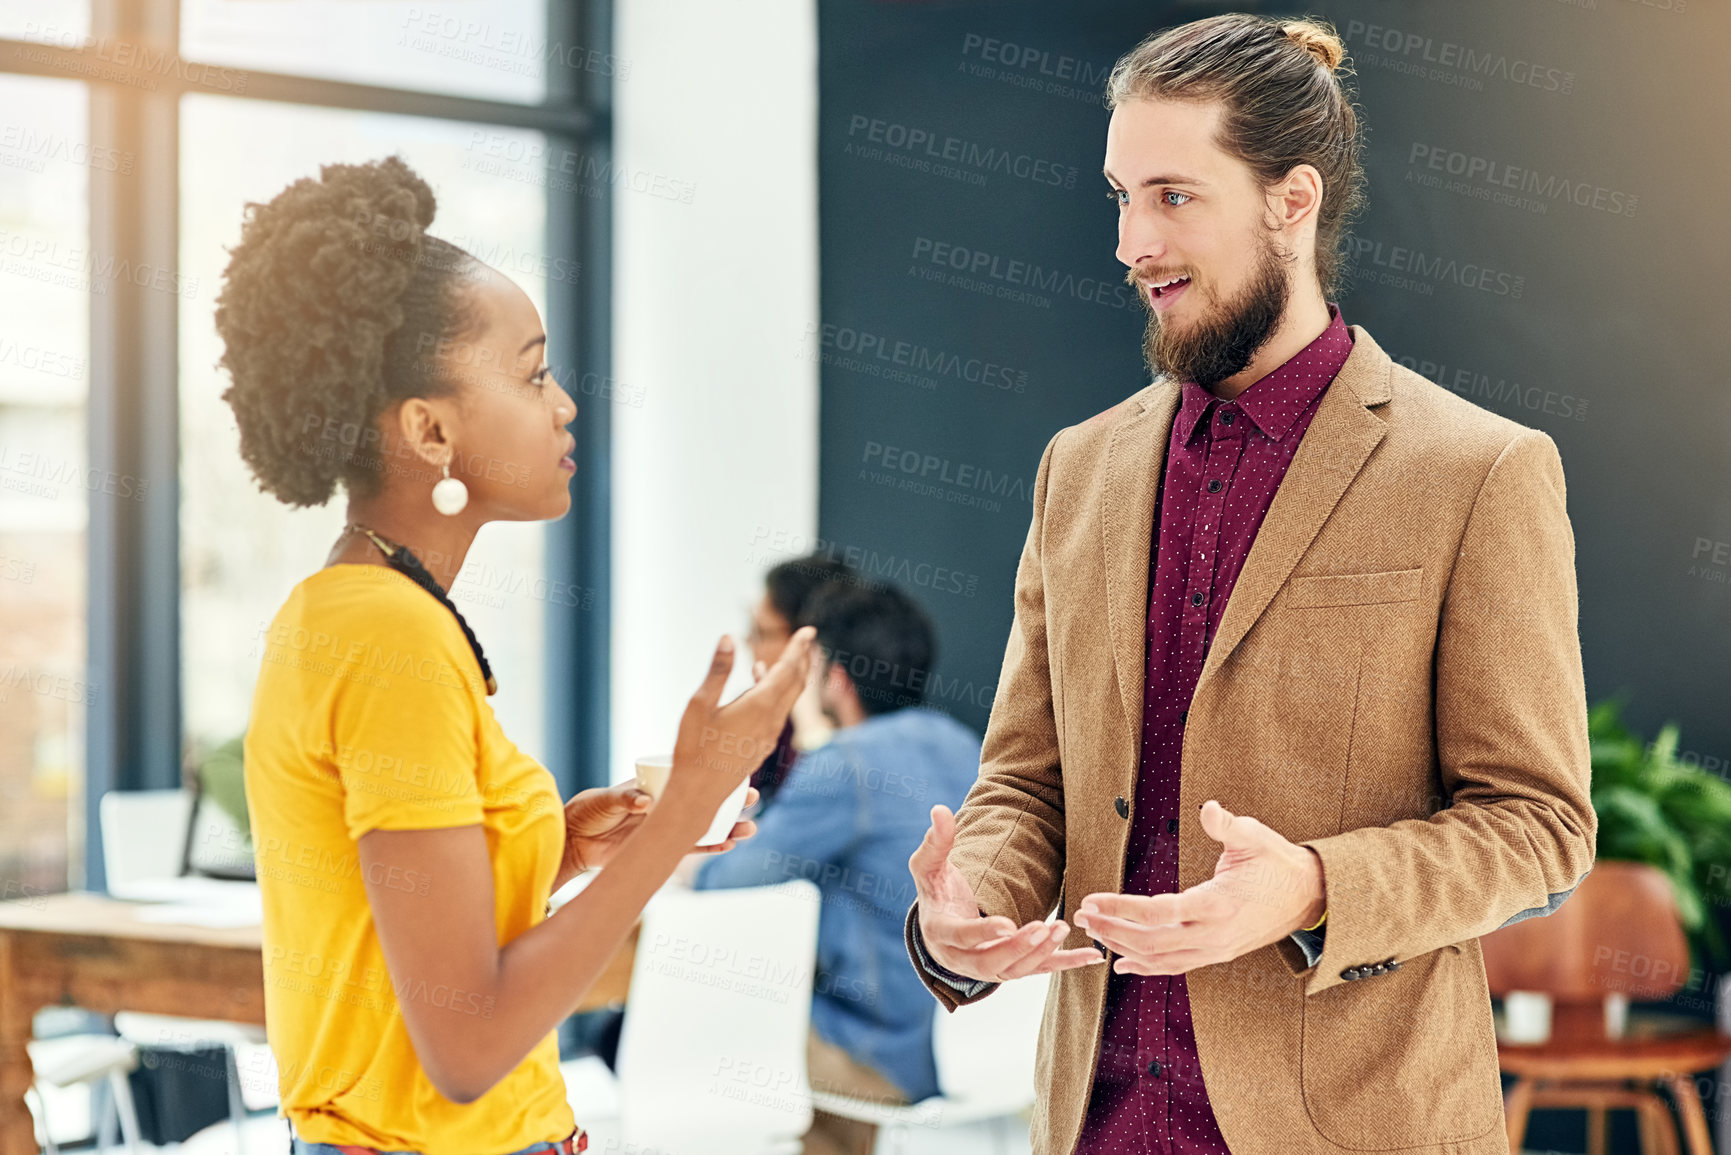 Buy stock photo Cropped shot of young creatives having a discussion in a modern office